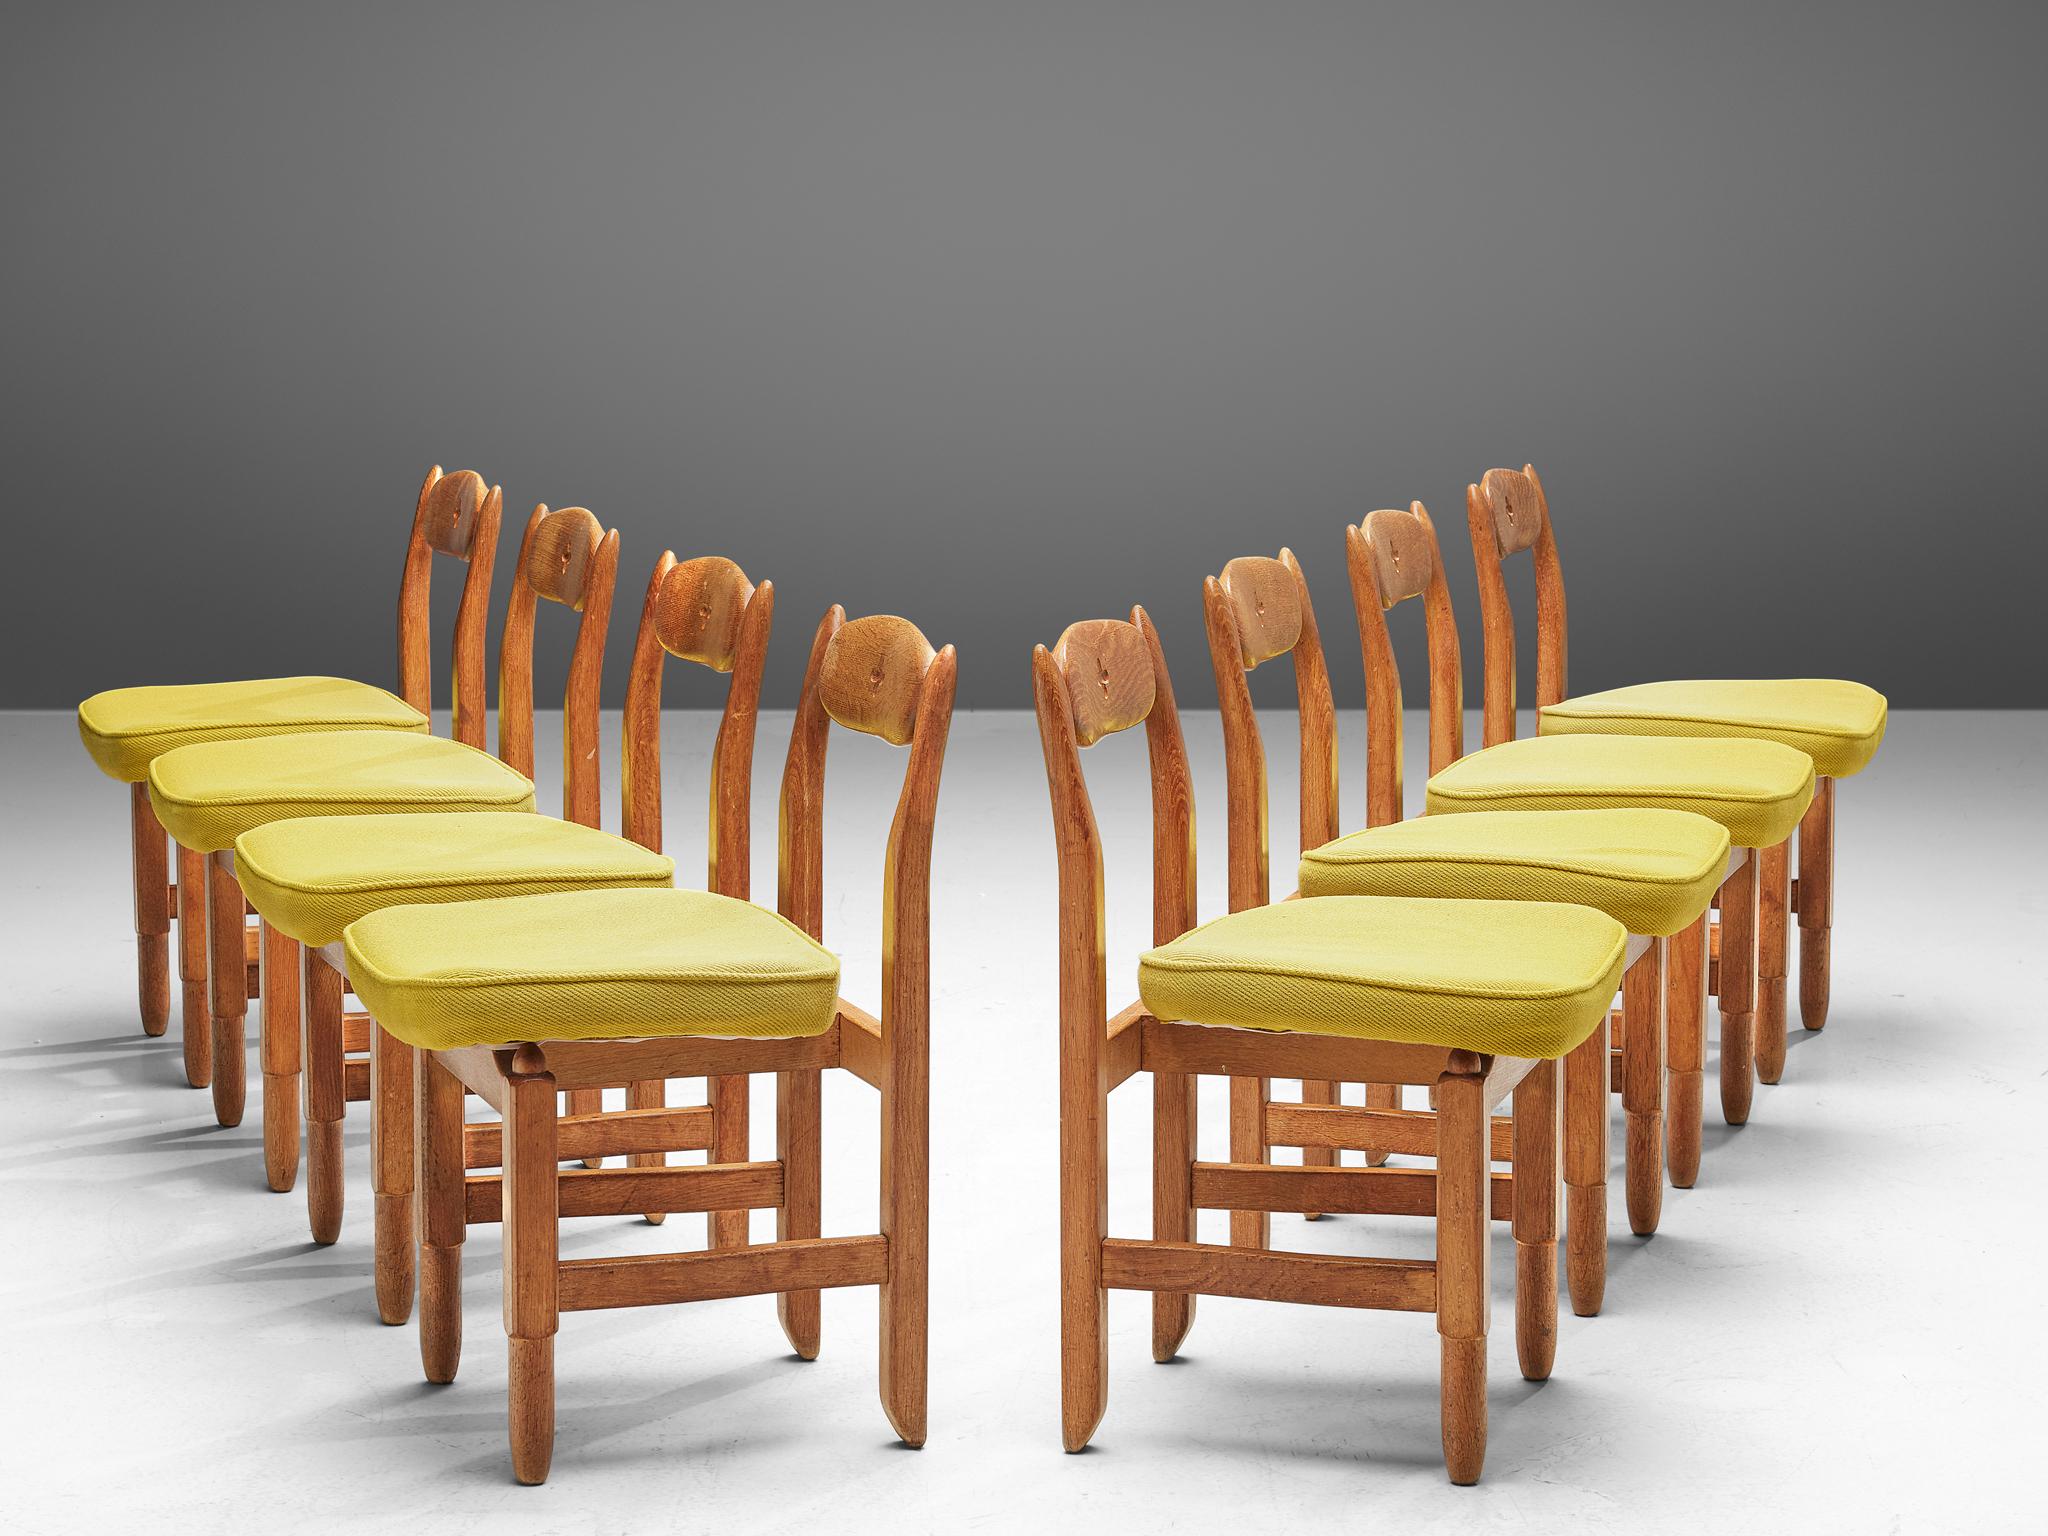 Guillerme and Chambron, set of 8 dining chairs, fabric, solid oak, France, 1960s.

These distinctive chairs in oak designed by the Guillerme et Chambron are offered per item. This dining chair shows organic, robust lines in almost every aspect of